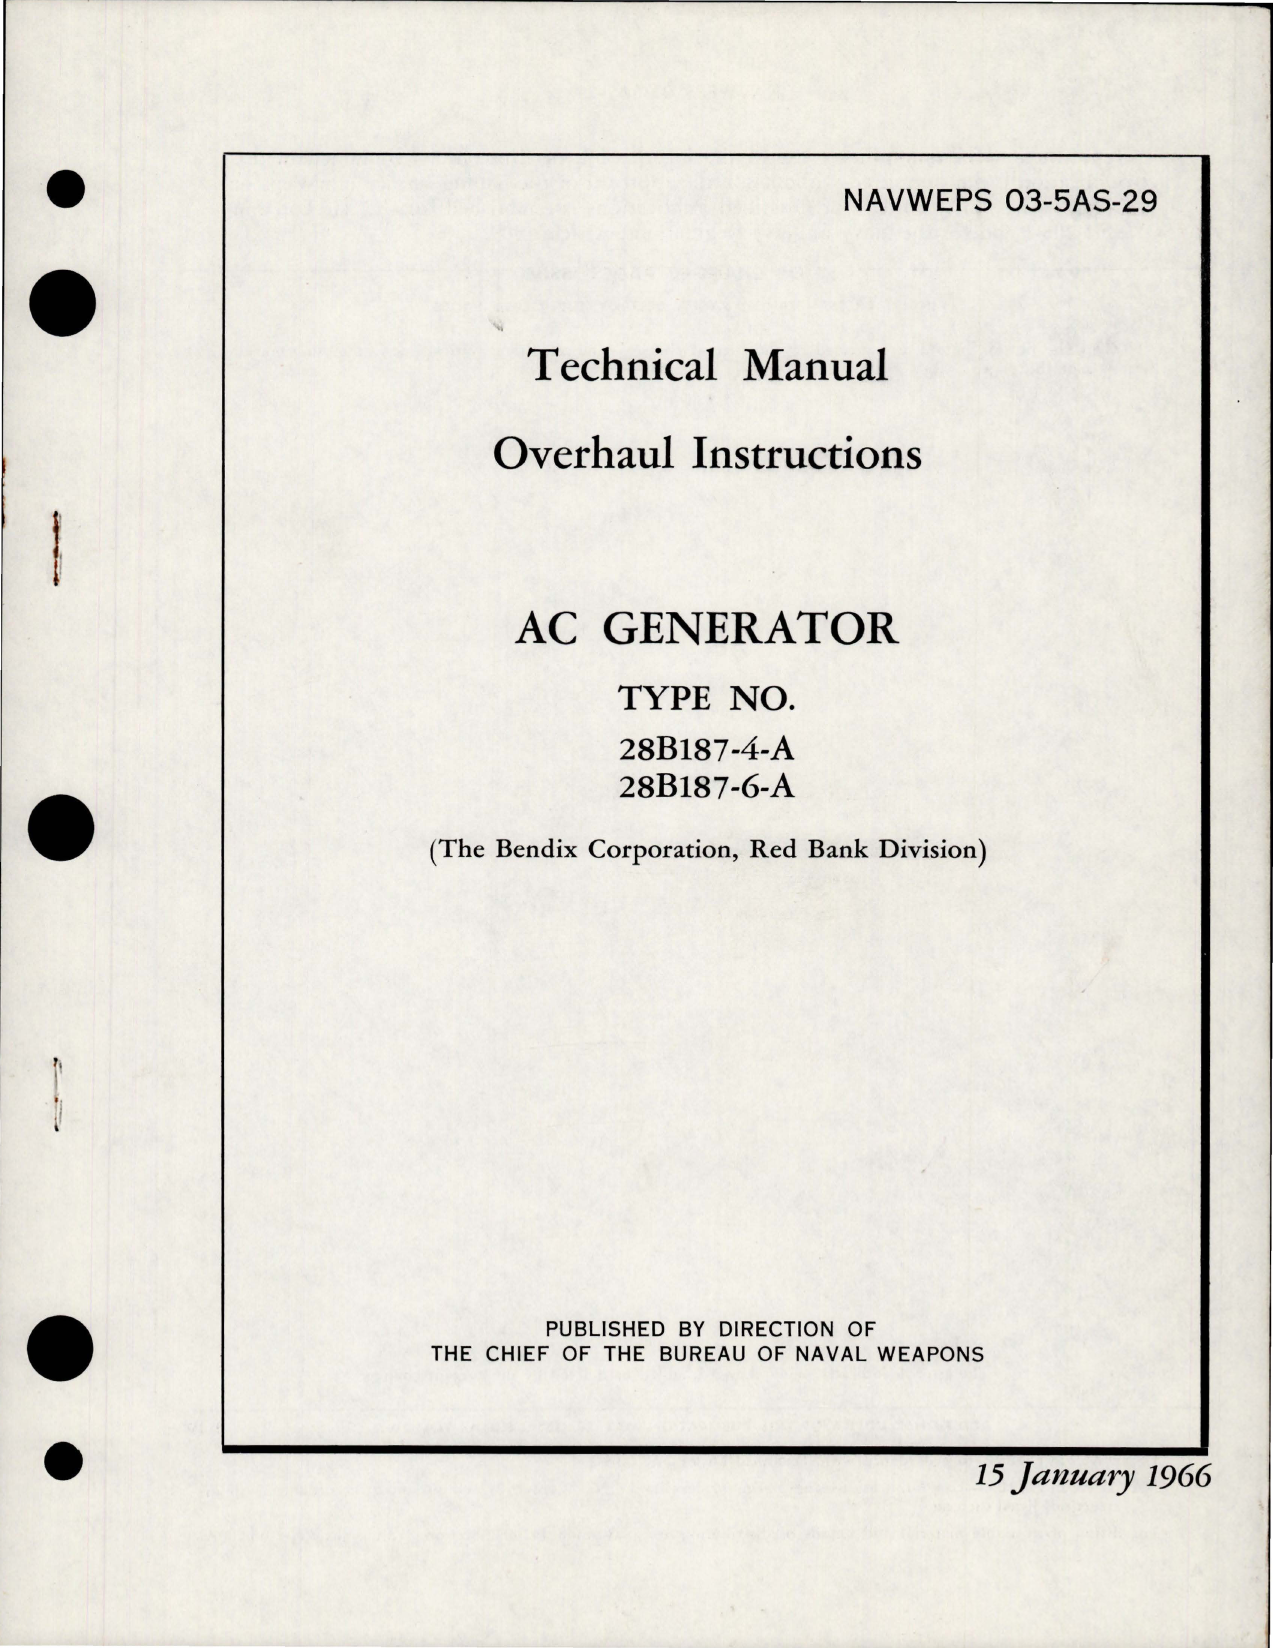 Sample page 1 from AirCorps Library document: Overhaul Instructions for AC Generator - Type 28B187-4-A, 28B187-6-A 